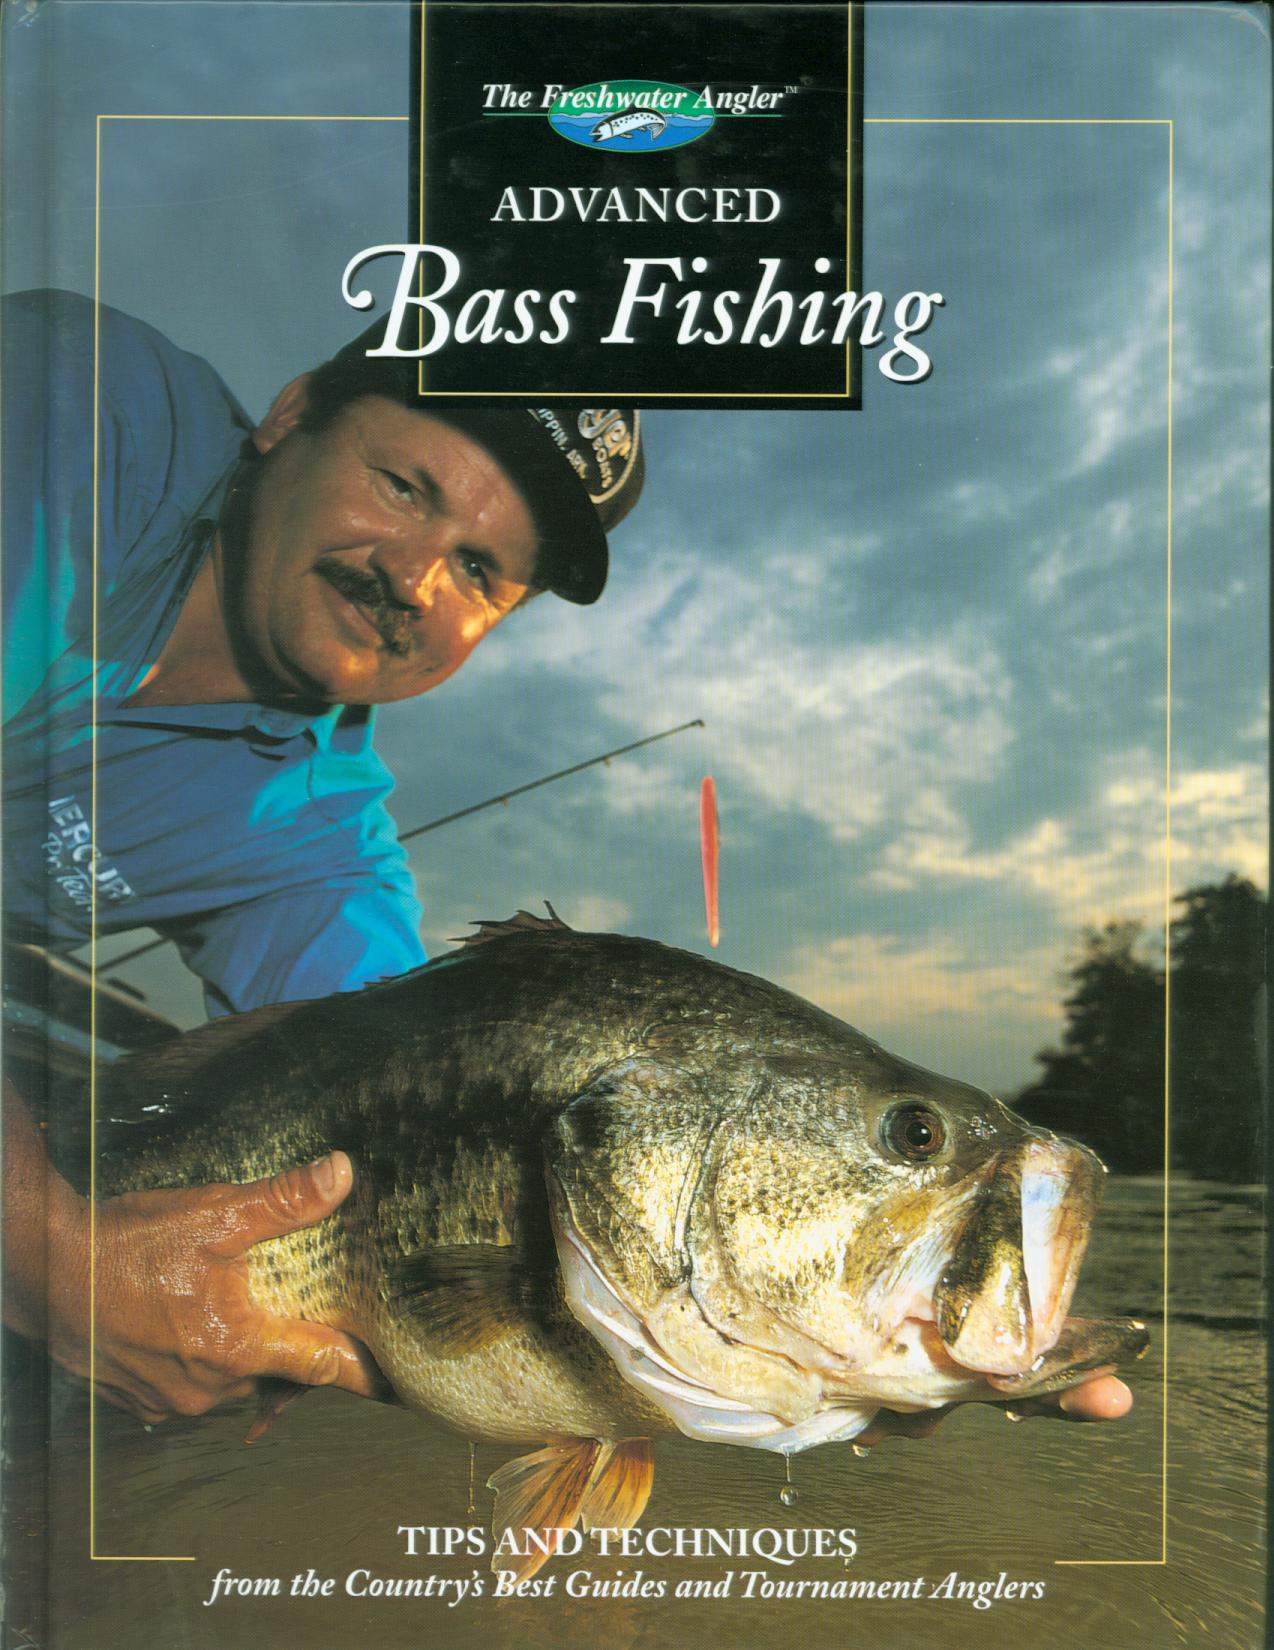 ADVANCED BASS FISHING: tips and techniques from the country's best guides and tournament anglers. 